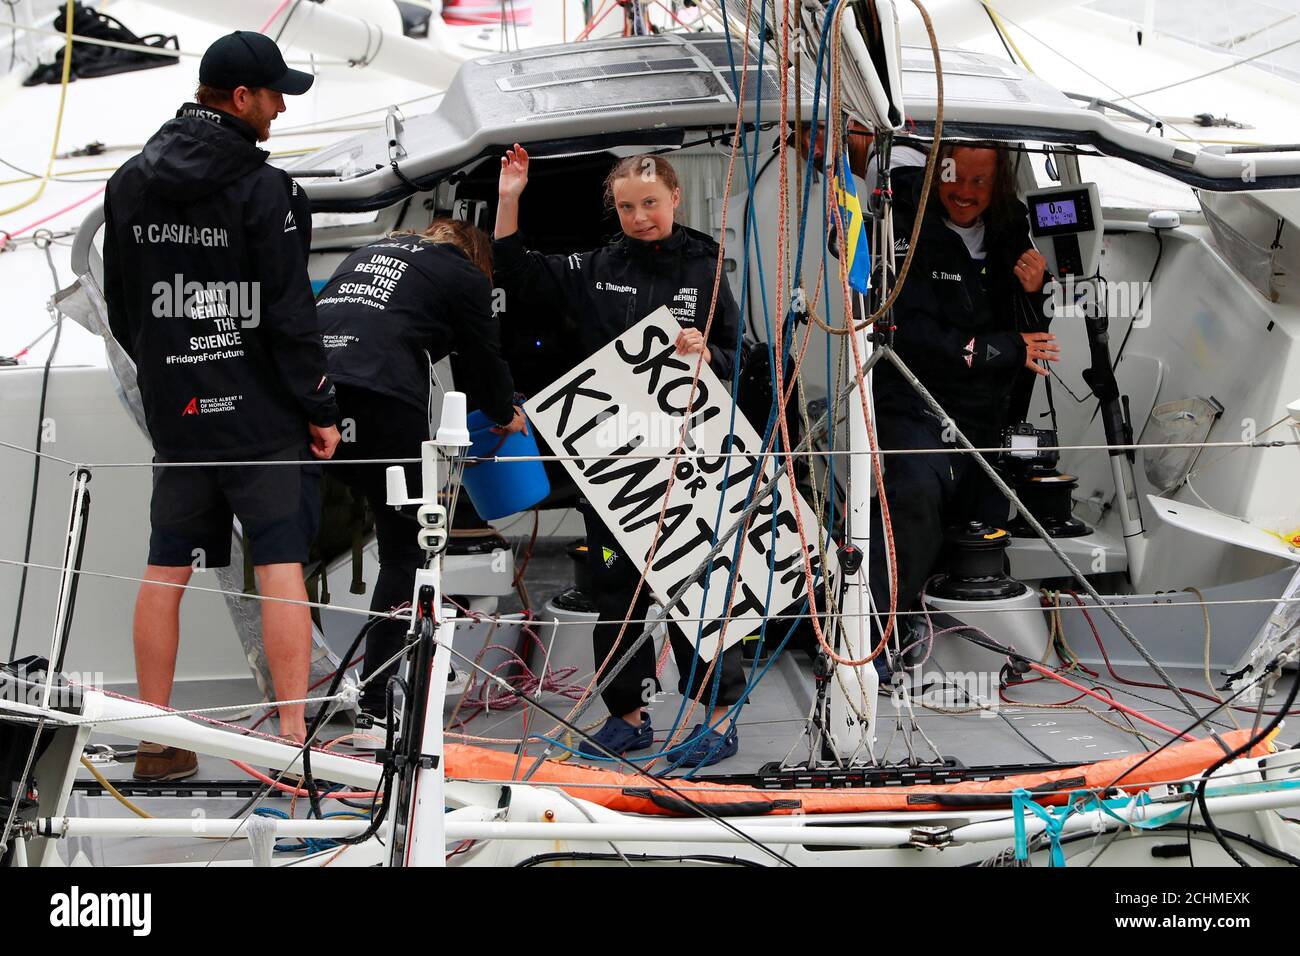 Swedish teenager Greta Thunberg and her sailing team on Malizia II arrive  in New York after making a zero-carbon journey across the Atlantic to  attend a United Nations summit and bring awareness